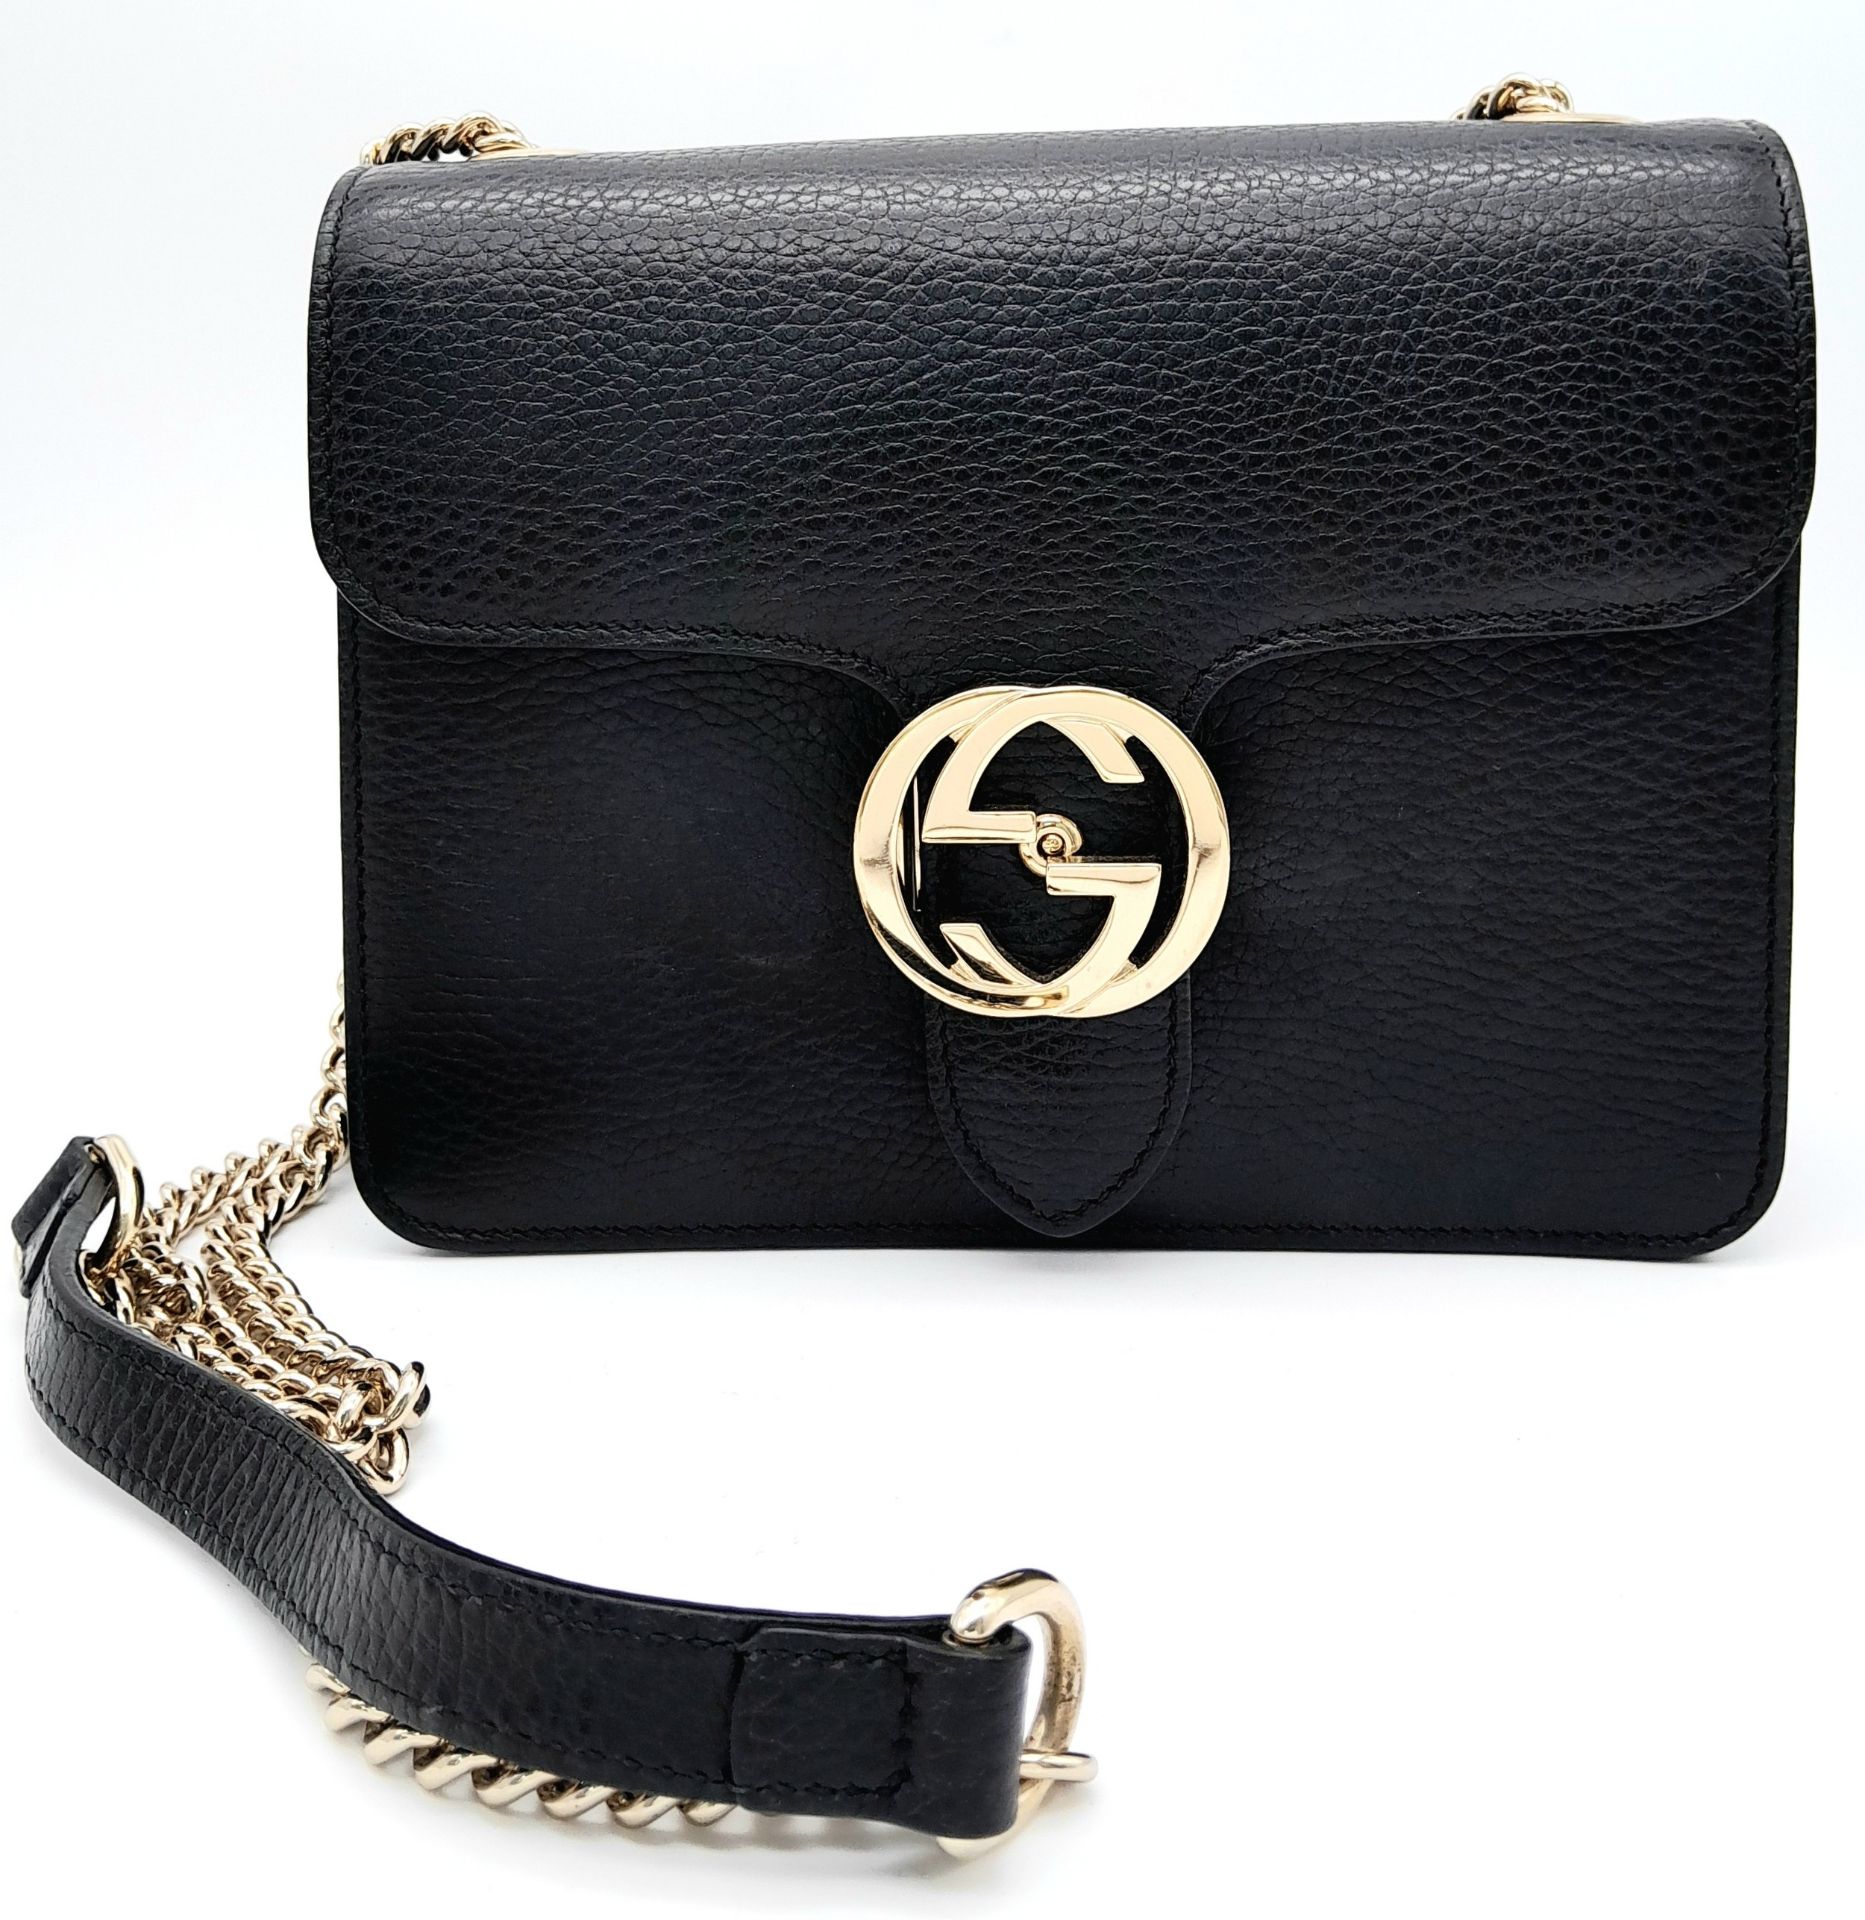 A Gucci Black GG Crossbody Bag. Leather exterior with gold-toned hardware, chain and leather